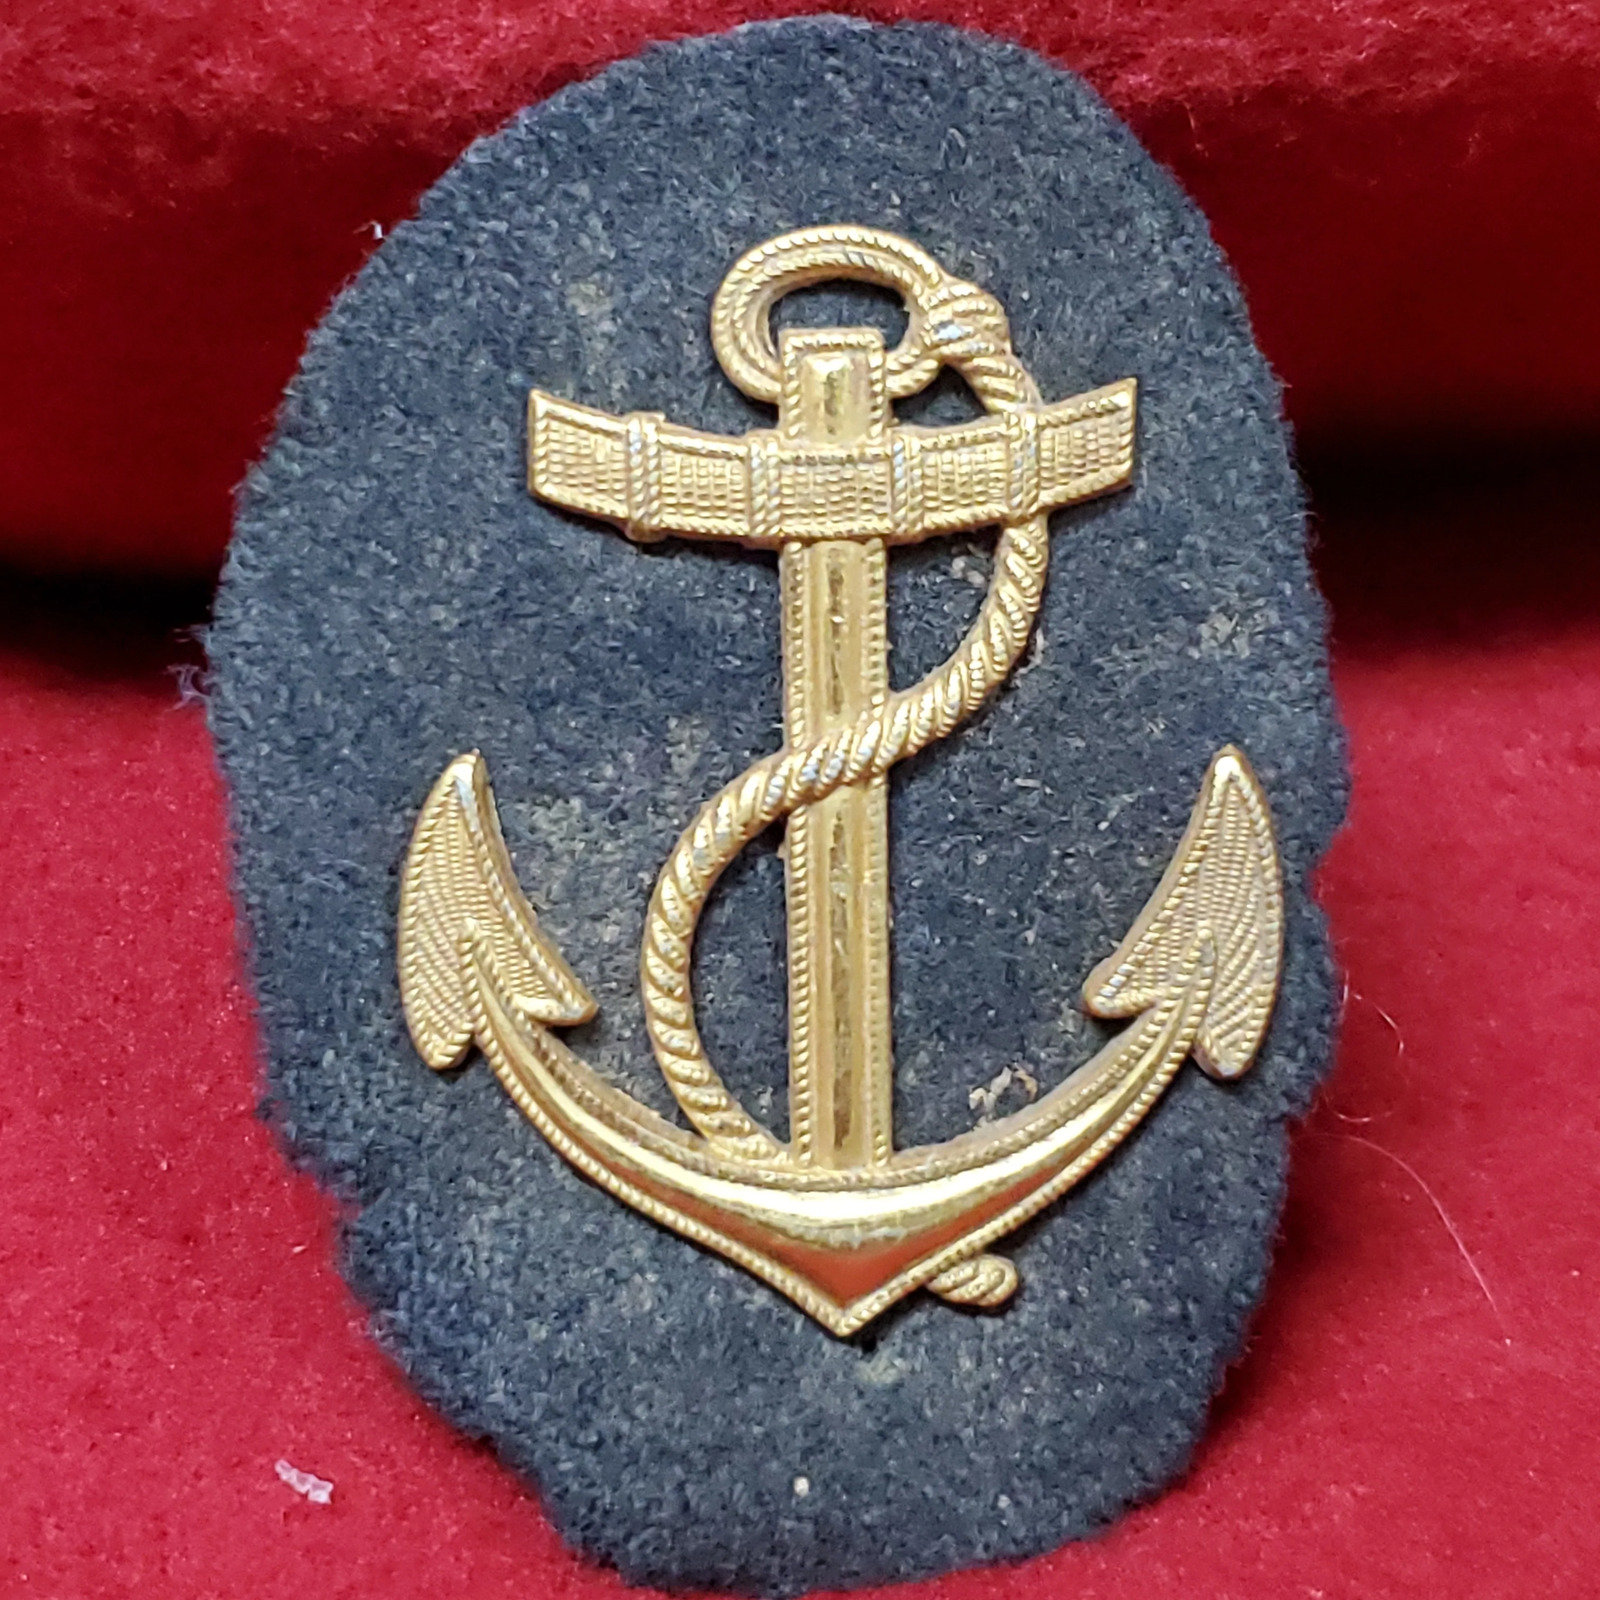 VINTAGE WWII German Navy Anchor Pin Cloth Backing Boatsman Mate 3rd Class Rank (